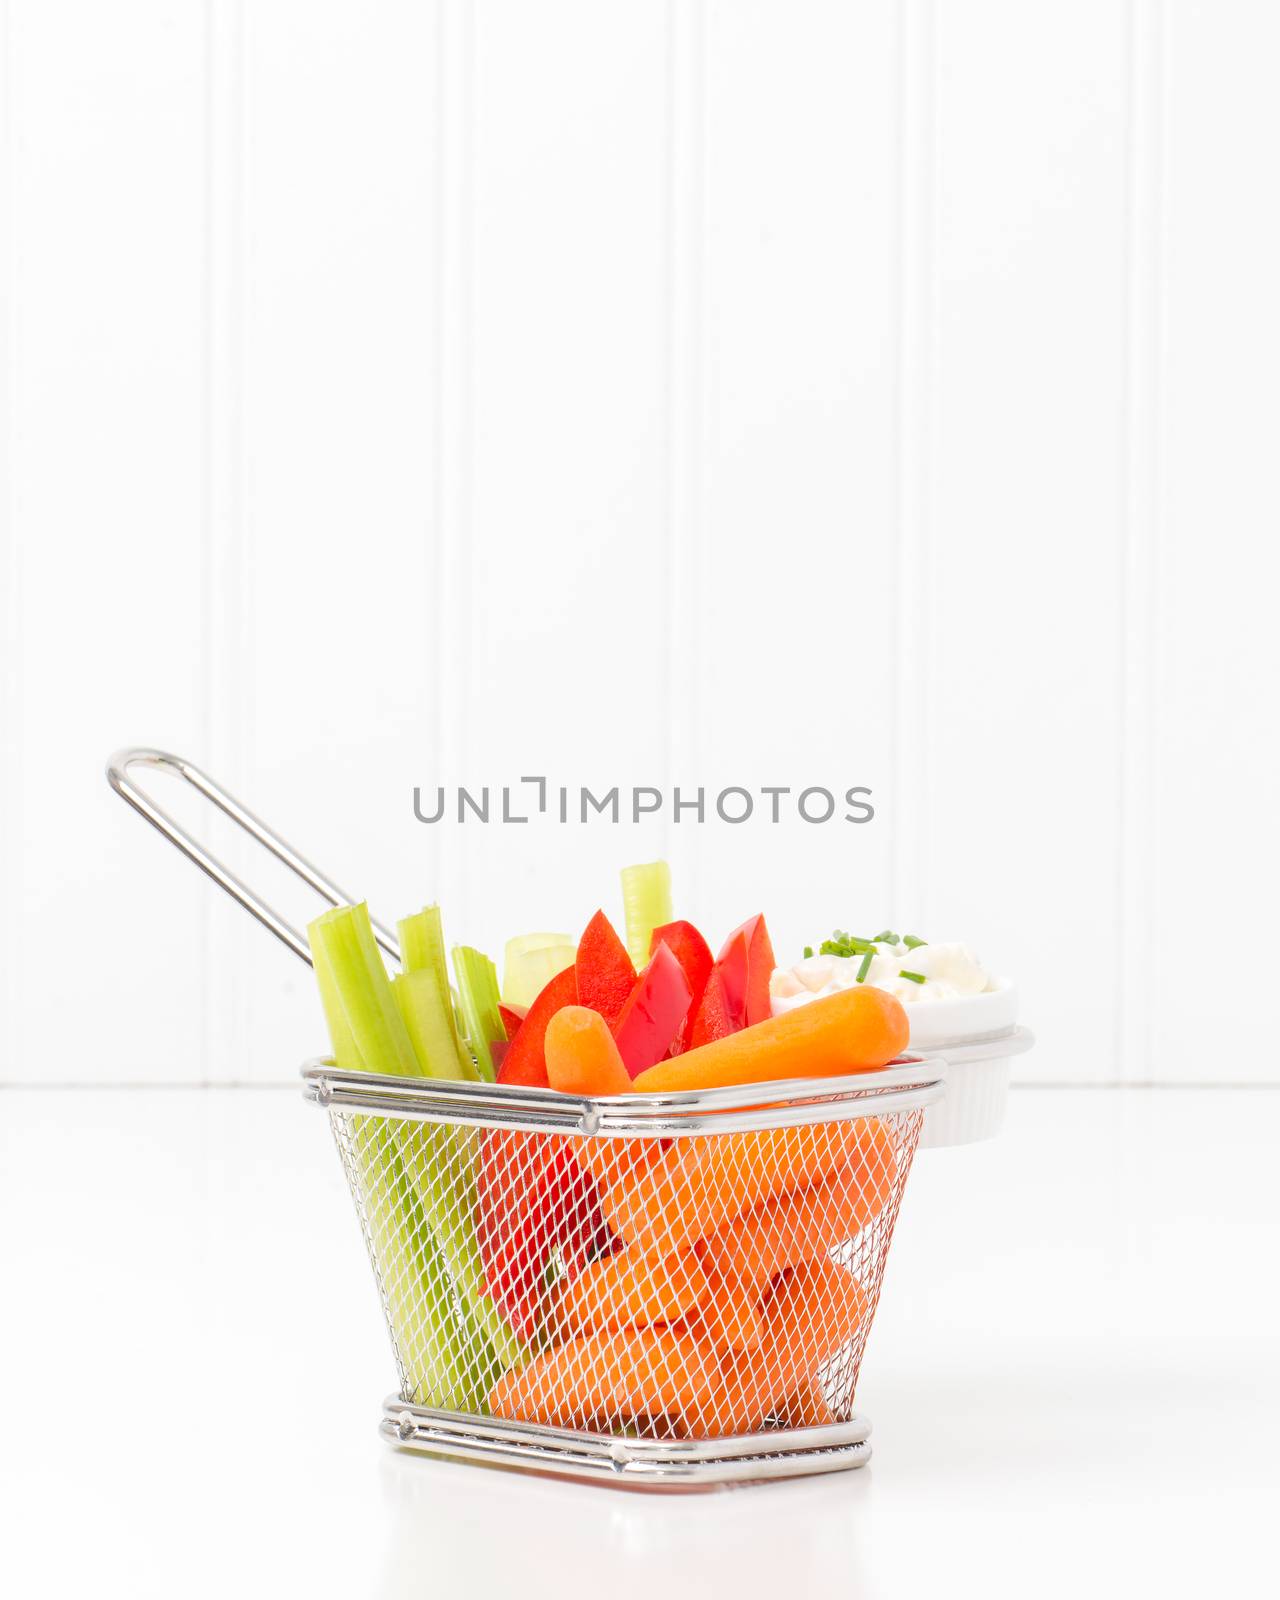 Raw vegetables and dip in a fryer basket suggesting an alternative to greasy fried foods.